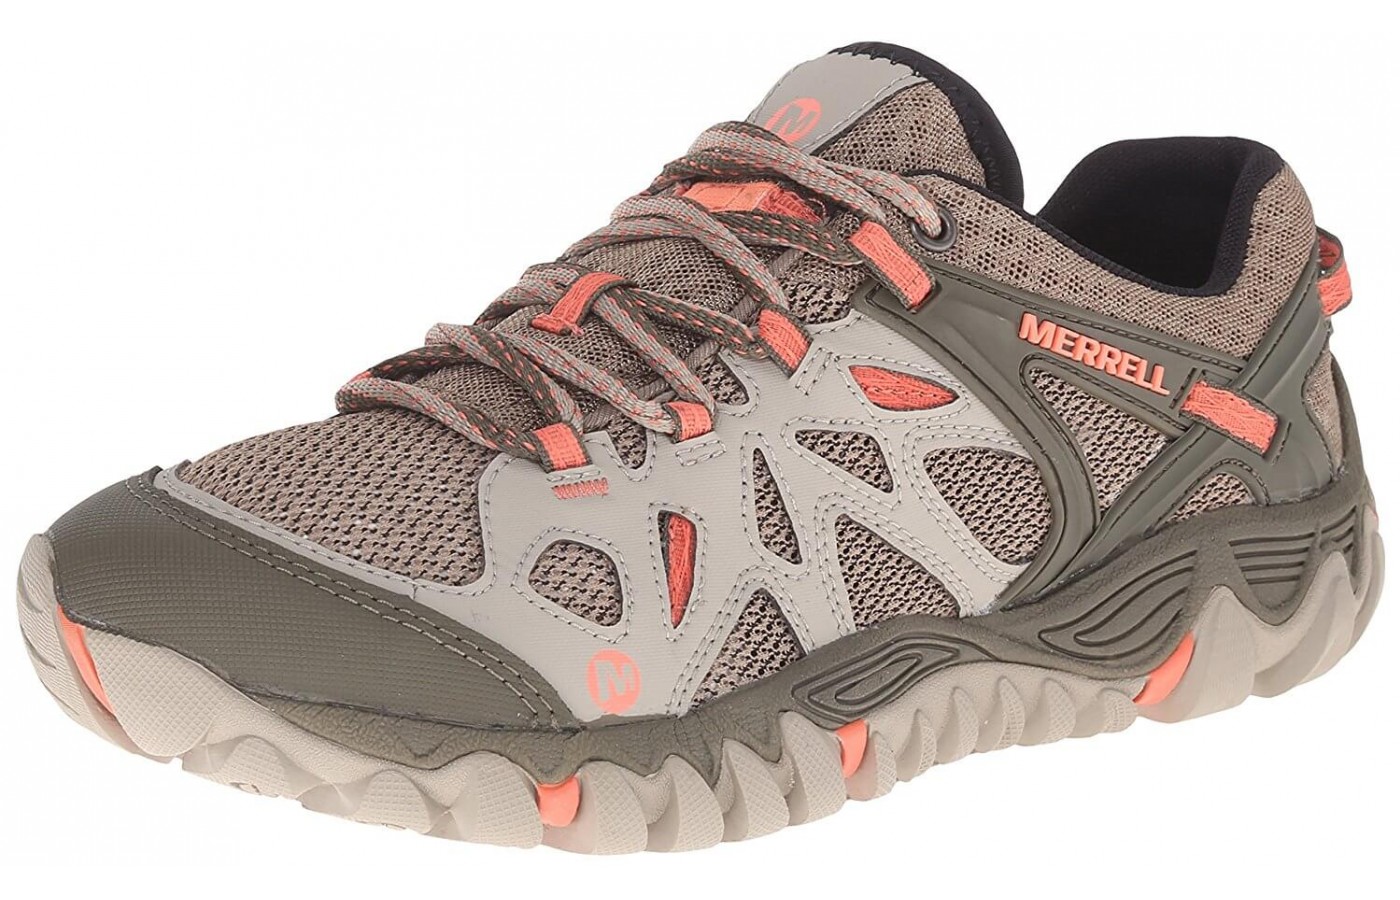 Merrell All Out Blaze Aero Sport is a quality trail running shoe